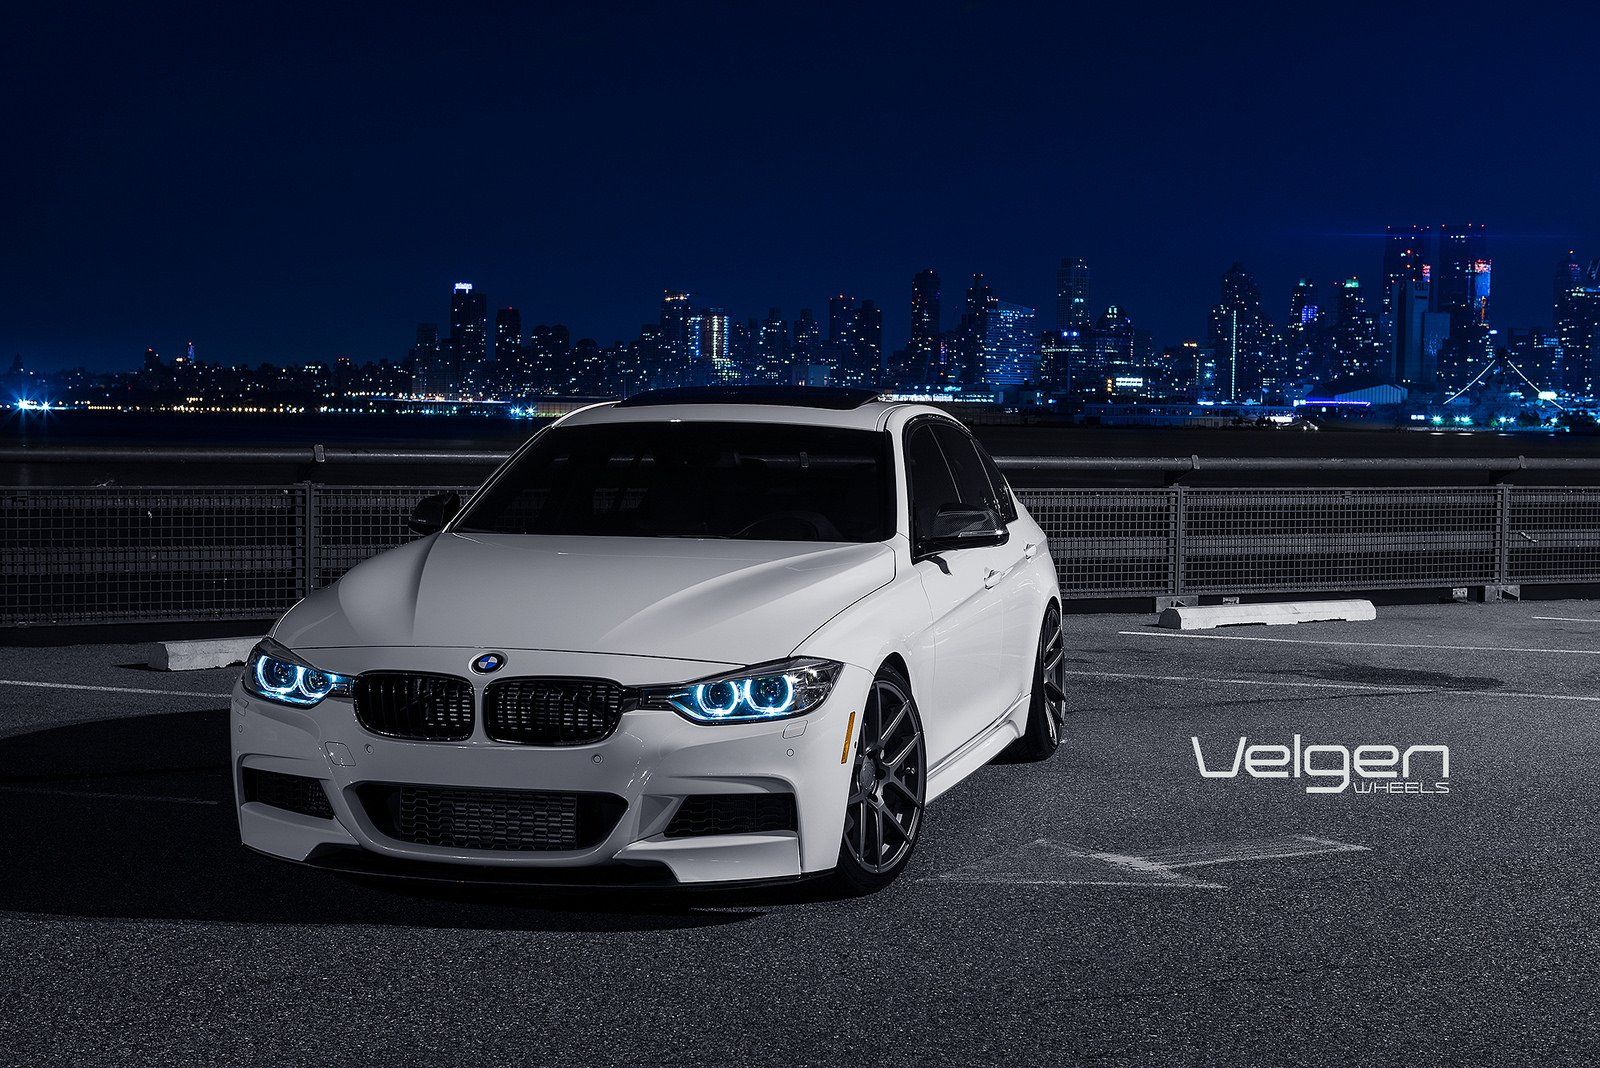 Bmw 335I F30 Wallpapers